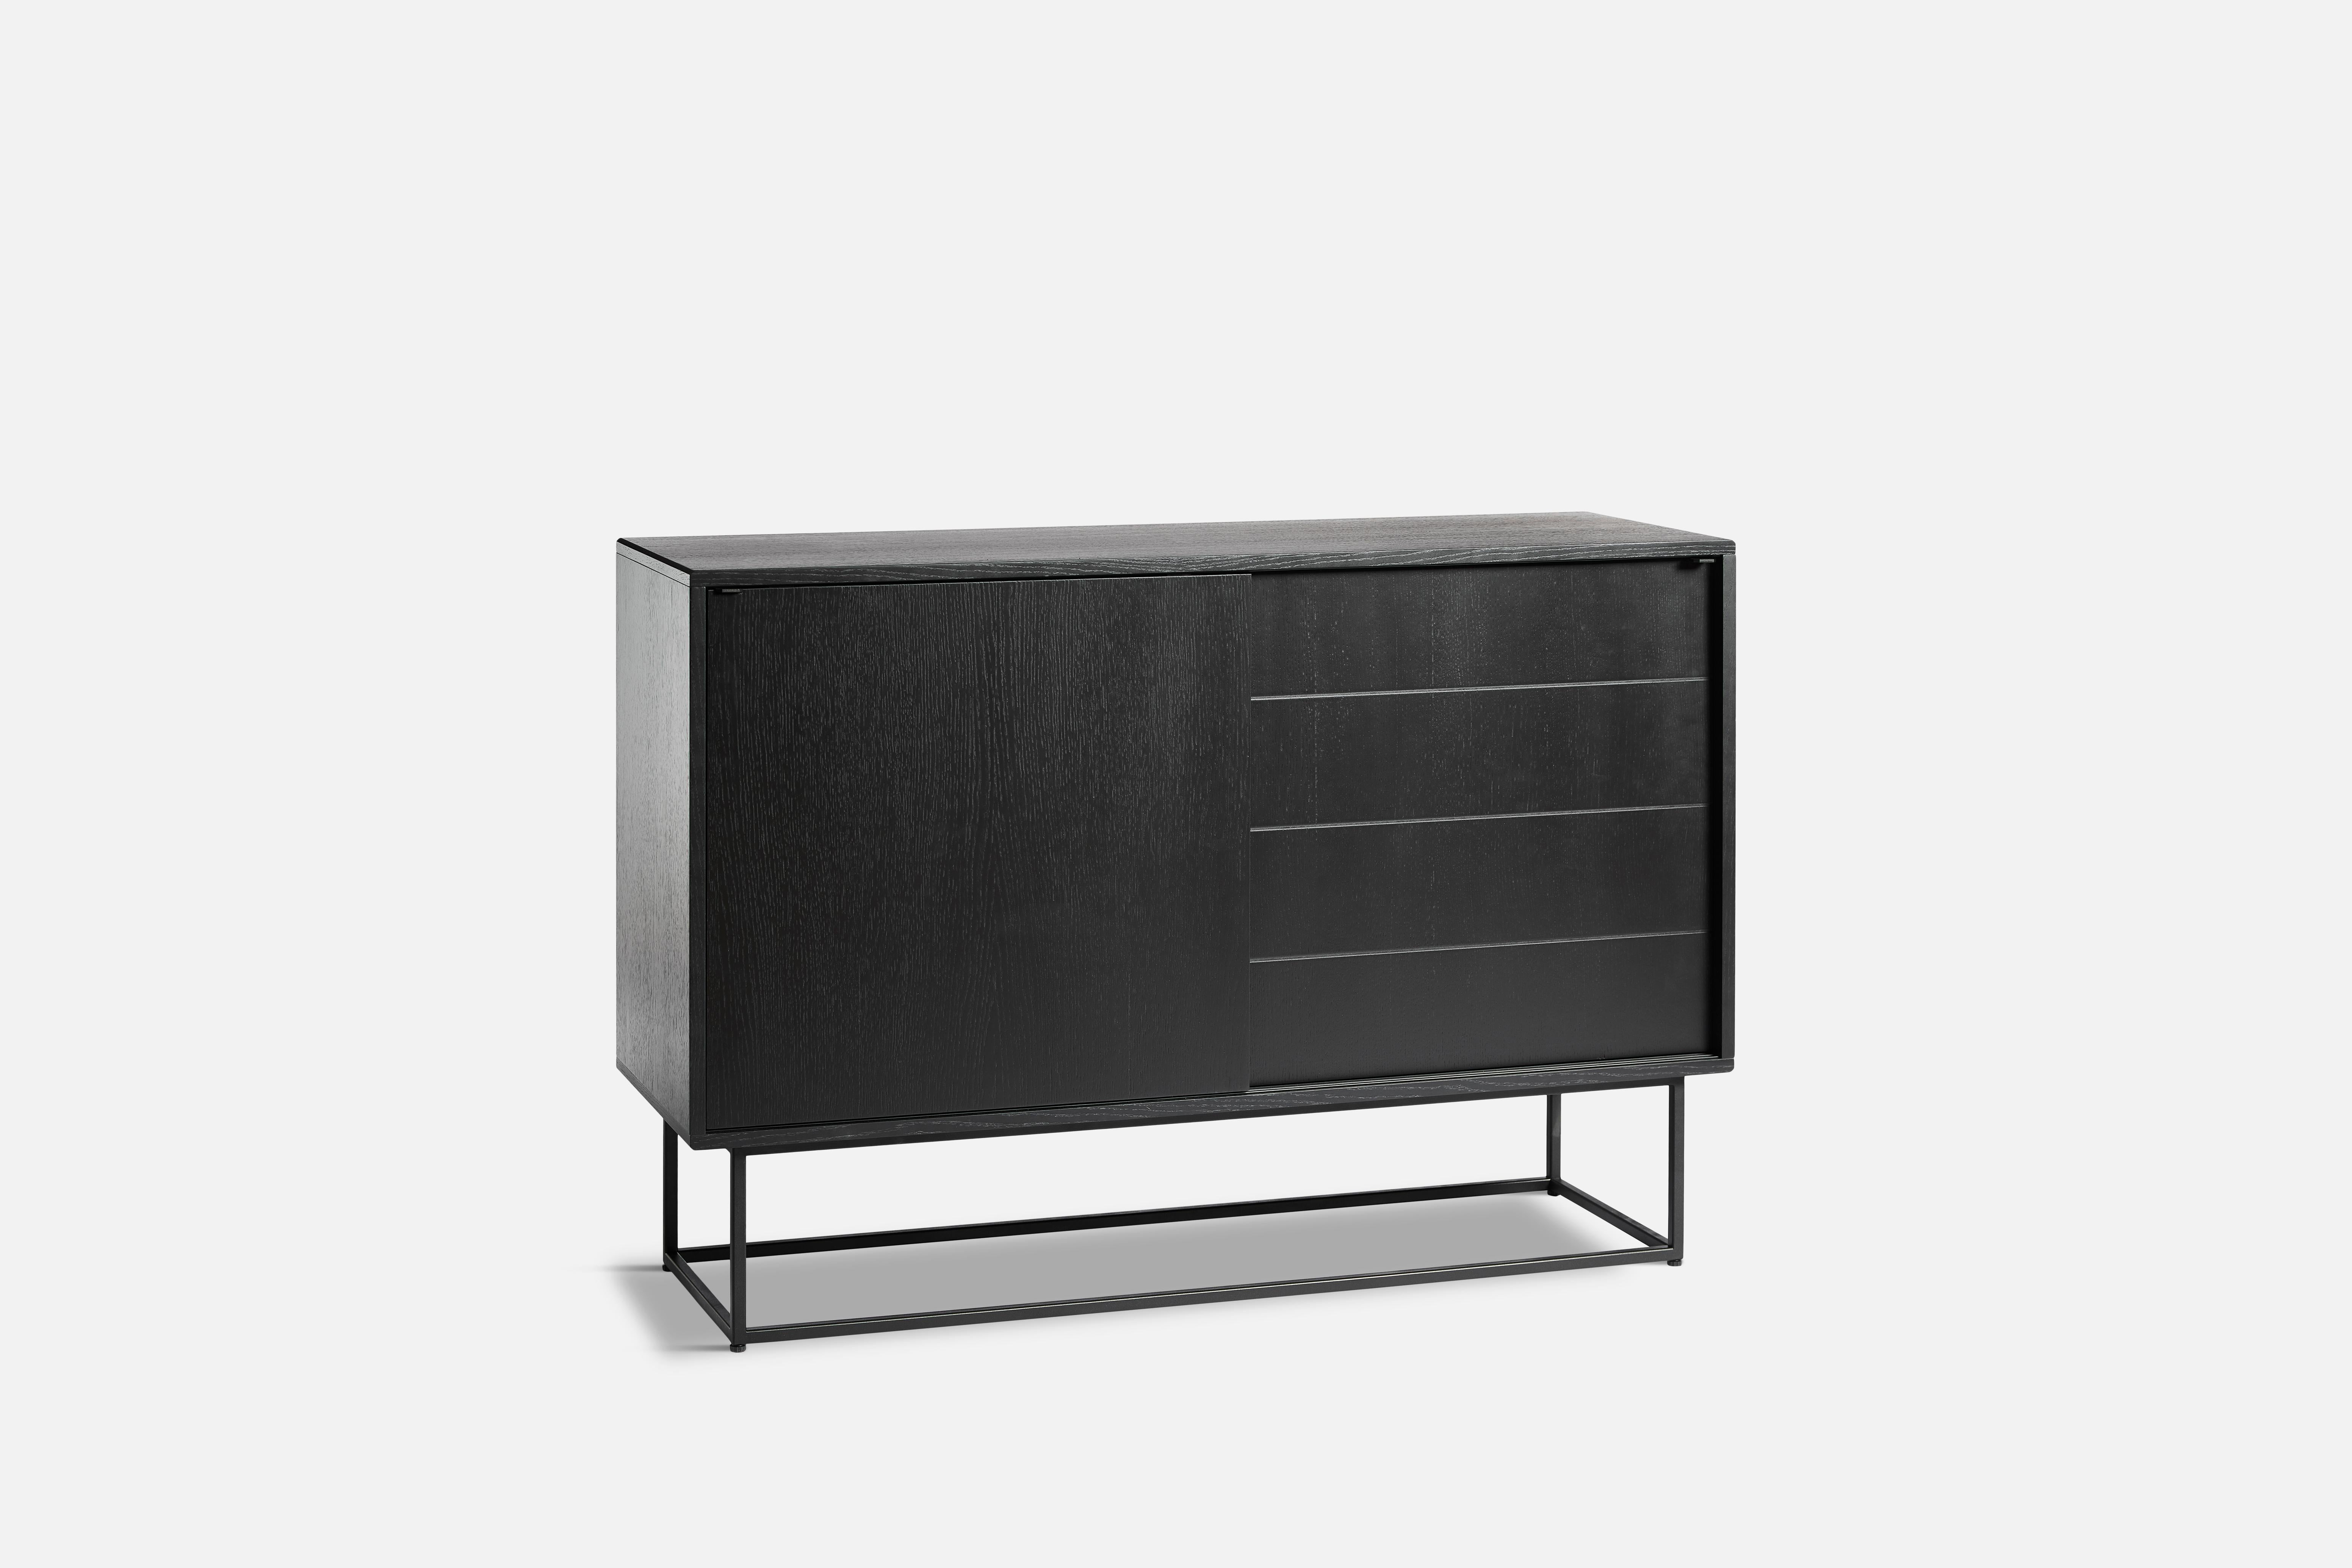 Black Oak Virka High sideboard by Ropke Design and Moaak.
Materials: Oak, Metal.
Dimensions: D 40 x W 120 x H 82 cm.
Also available in different colours and materials. 

The founders, Mia and Torben Koed, decided to put their 30 years of